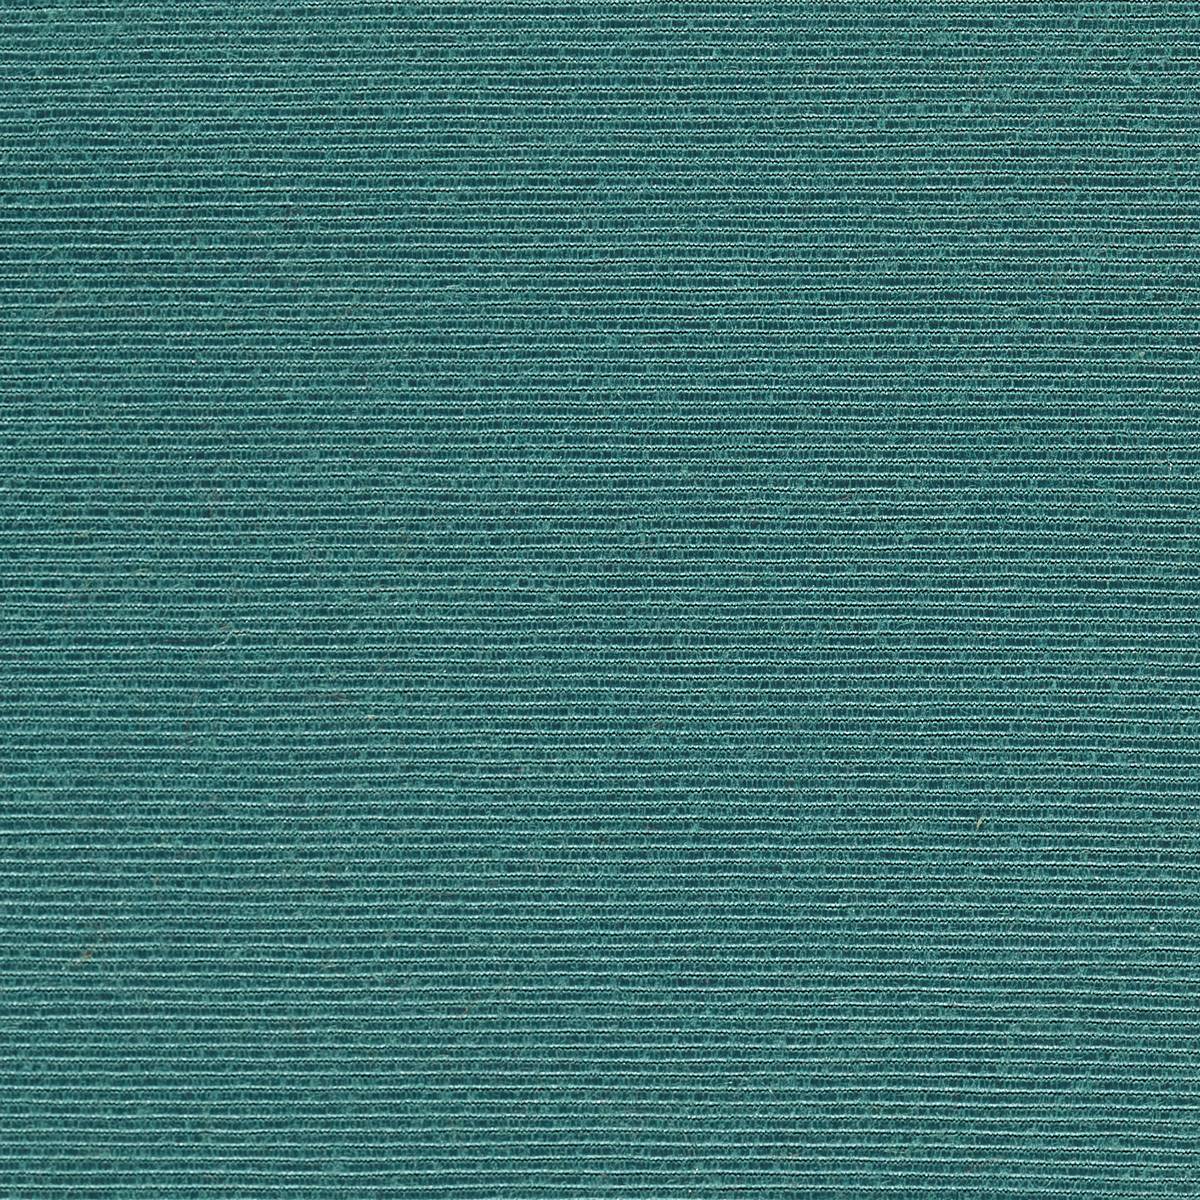 Optix Teal Fabric by Harlequin